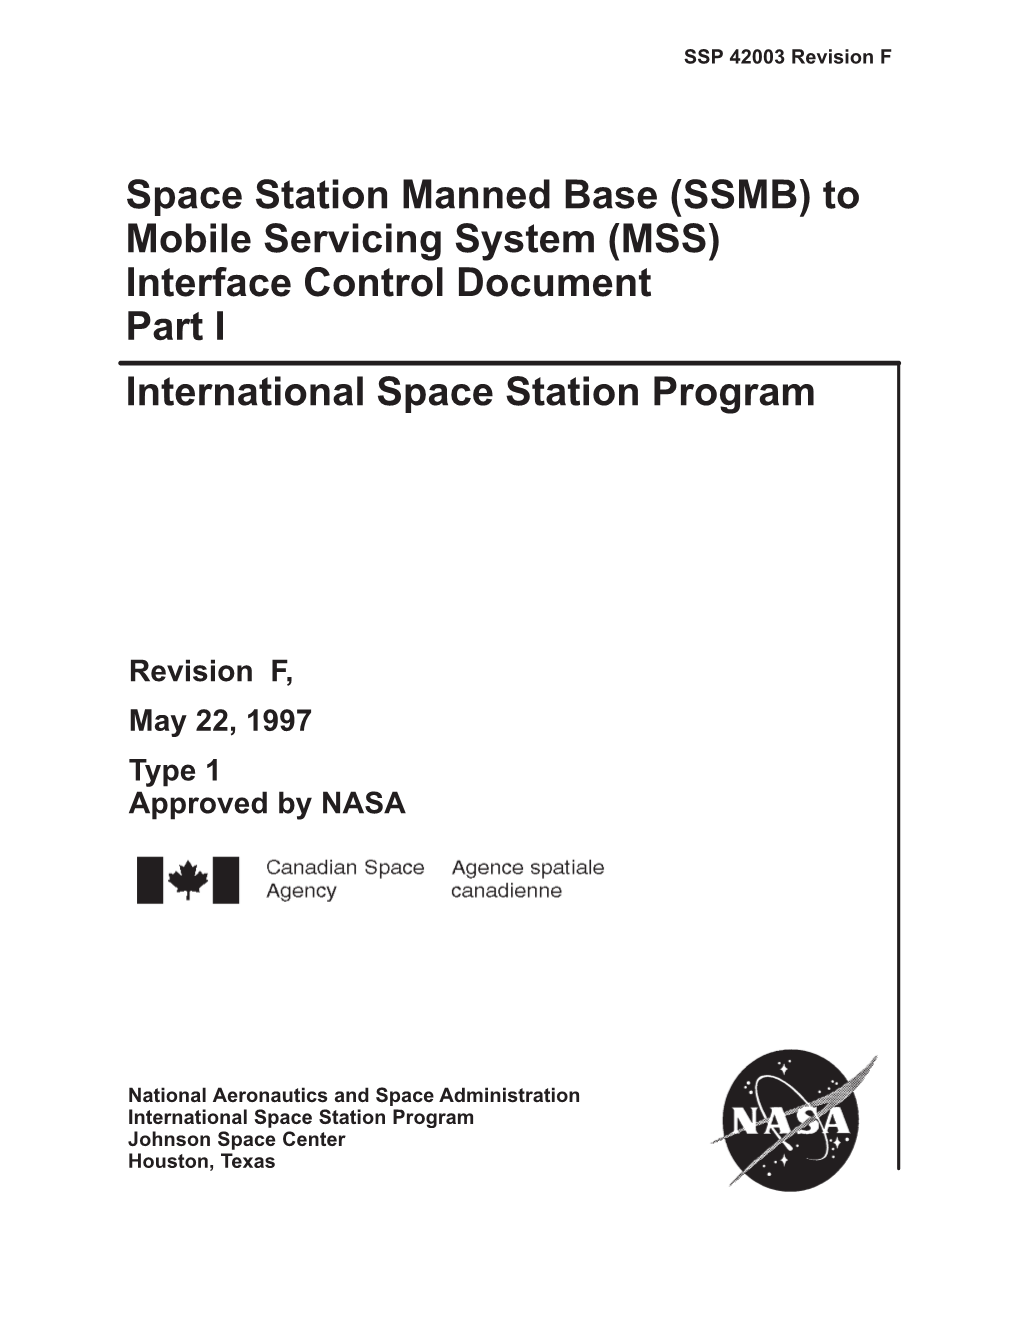 (SSMB) to Mobile Servicing System (MSS) Interface Control Document Part I International Space Station Program